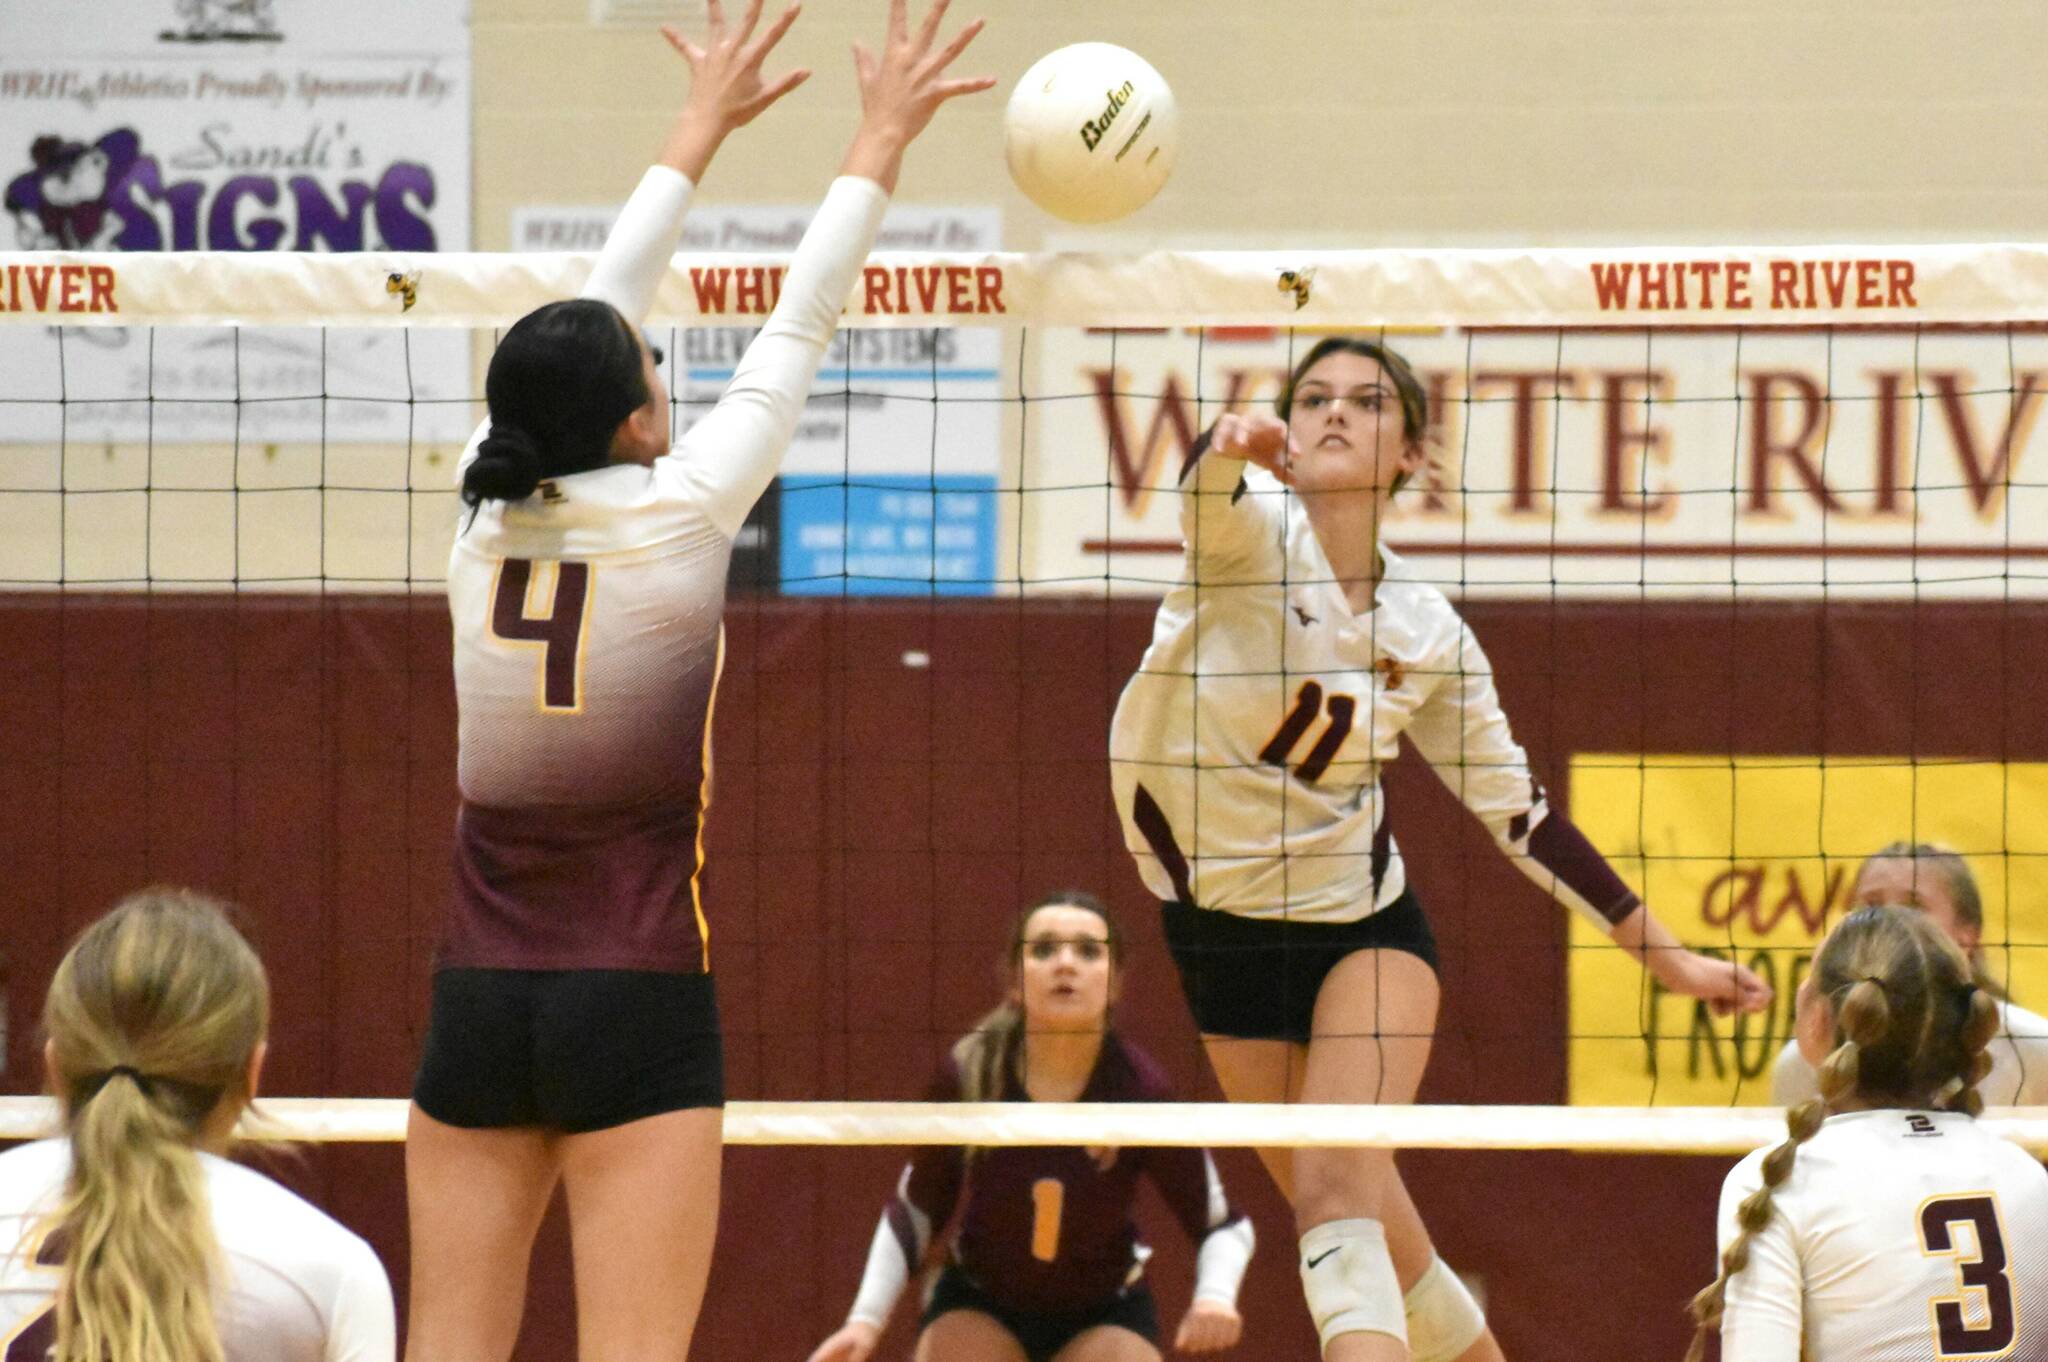 PHOTO BY KEVIN HANSON
With Enumclaw High’s Ailianna Quaempts defending at the net, White River’s Marli Miller registers a kill during an October 26 showdown in Buckley. Ready to respond are White River’s Ava Froemke and Enumclaw’s Natalie DeMarco (2) and Haley Dumontet (3).